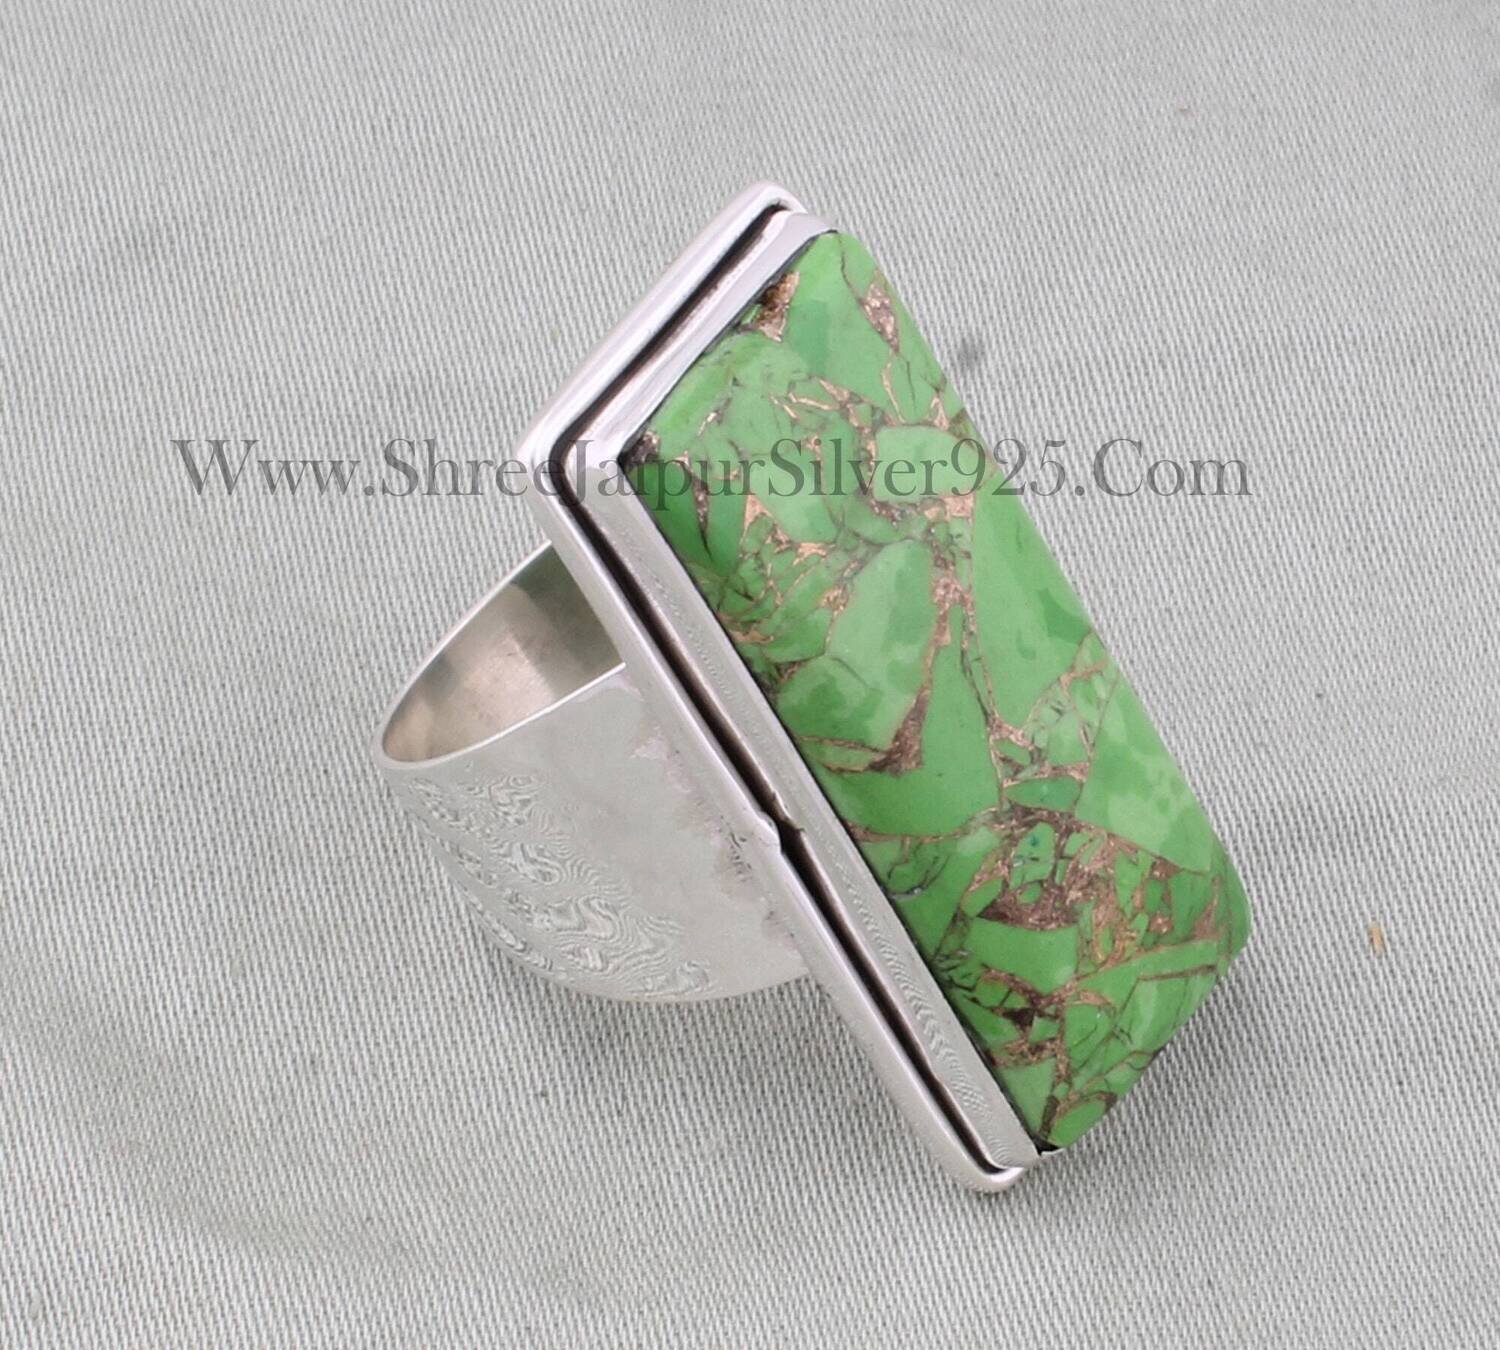 Green Copper Turquoise Solid 925 Sterling Silver Ring, Handmade Hammered Bar Band Ring Gifts For Her Birthday Wedding AnniversaryBirthstone